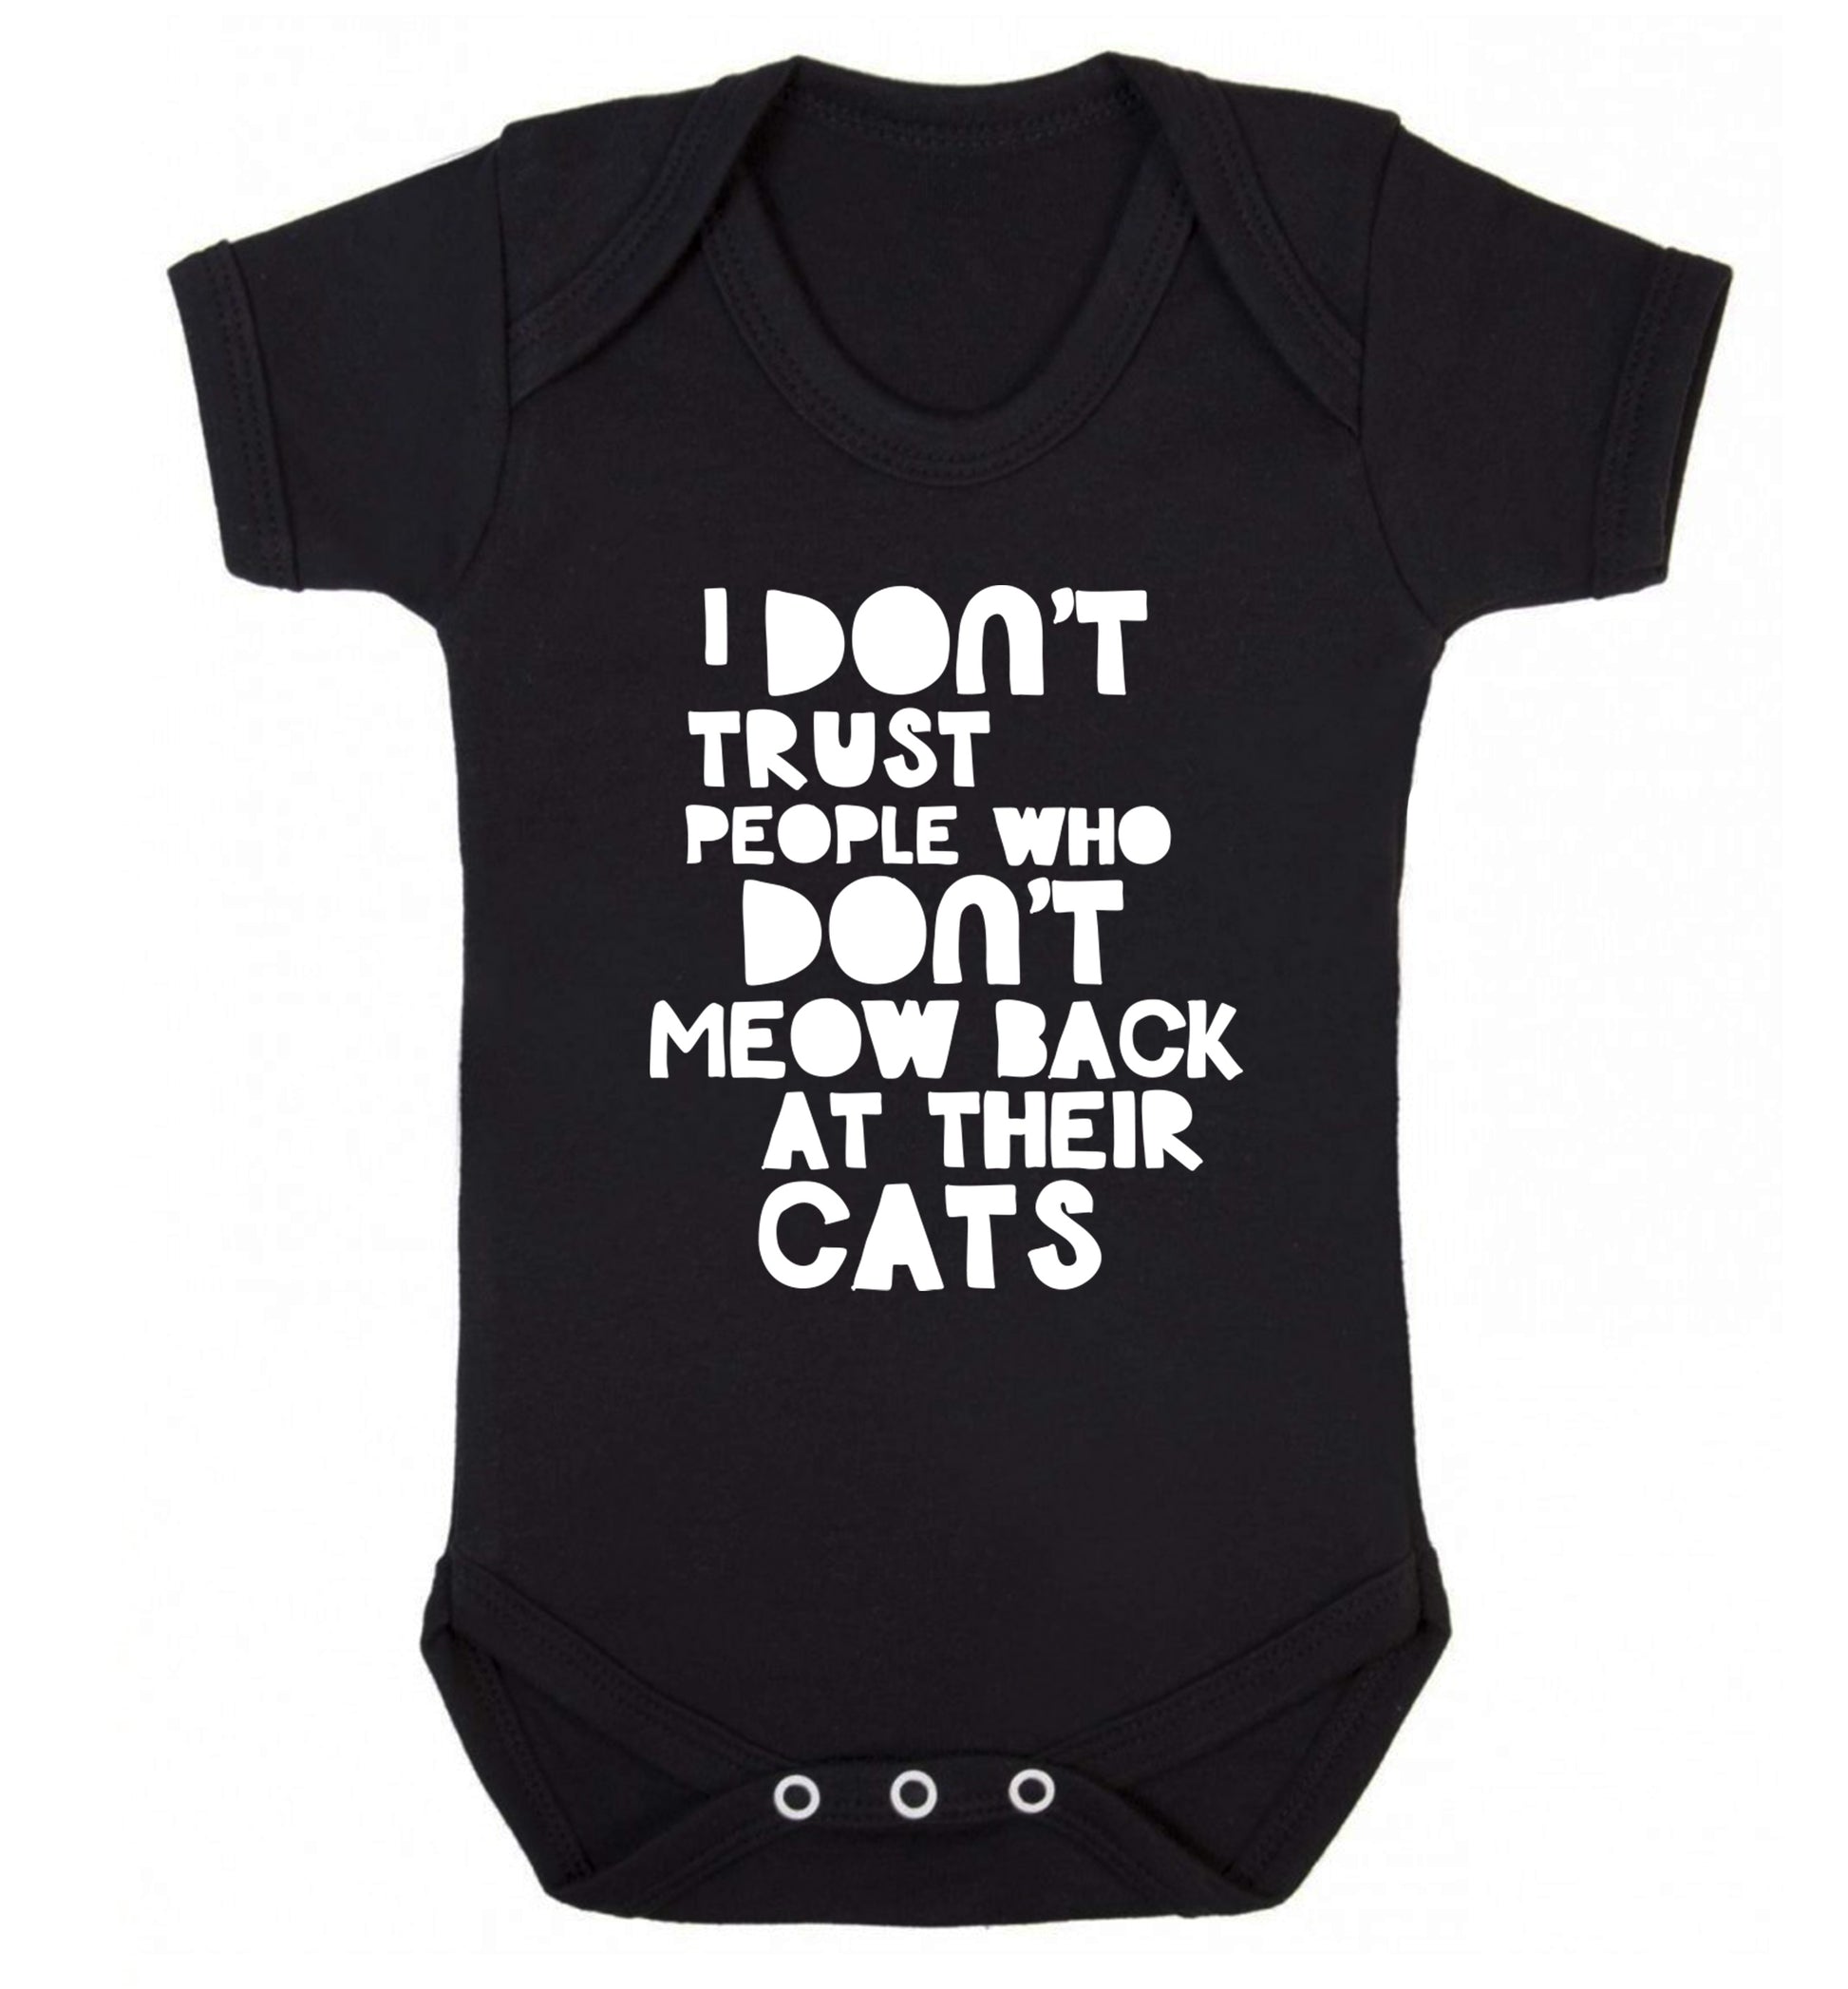 I don't trust people who don't meow back at their cats Baby Vest black 18-24 months